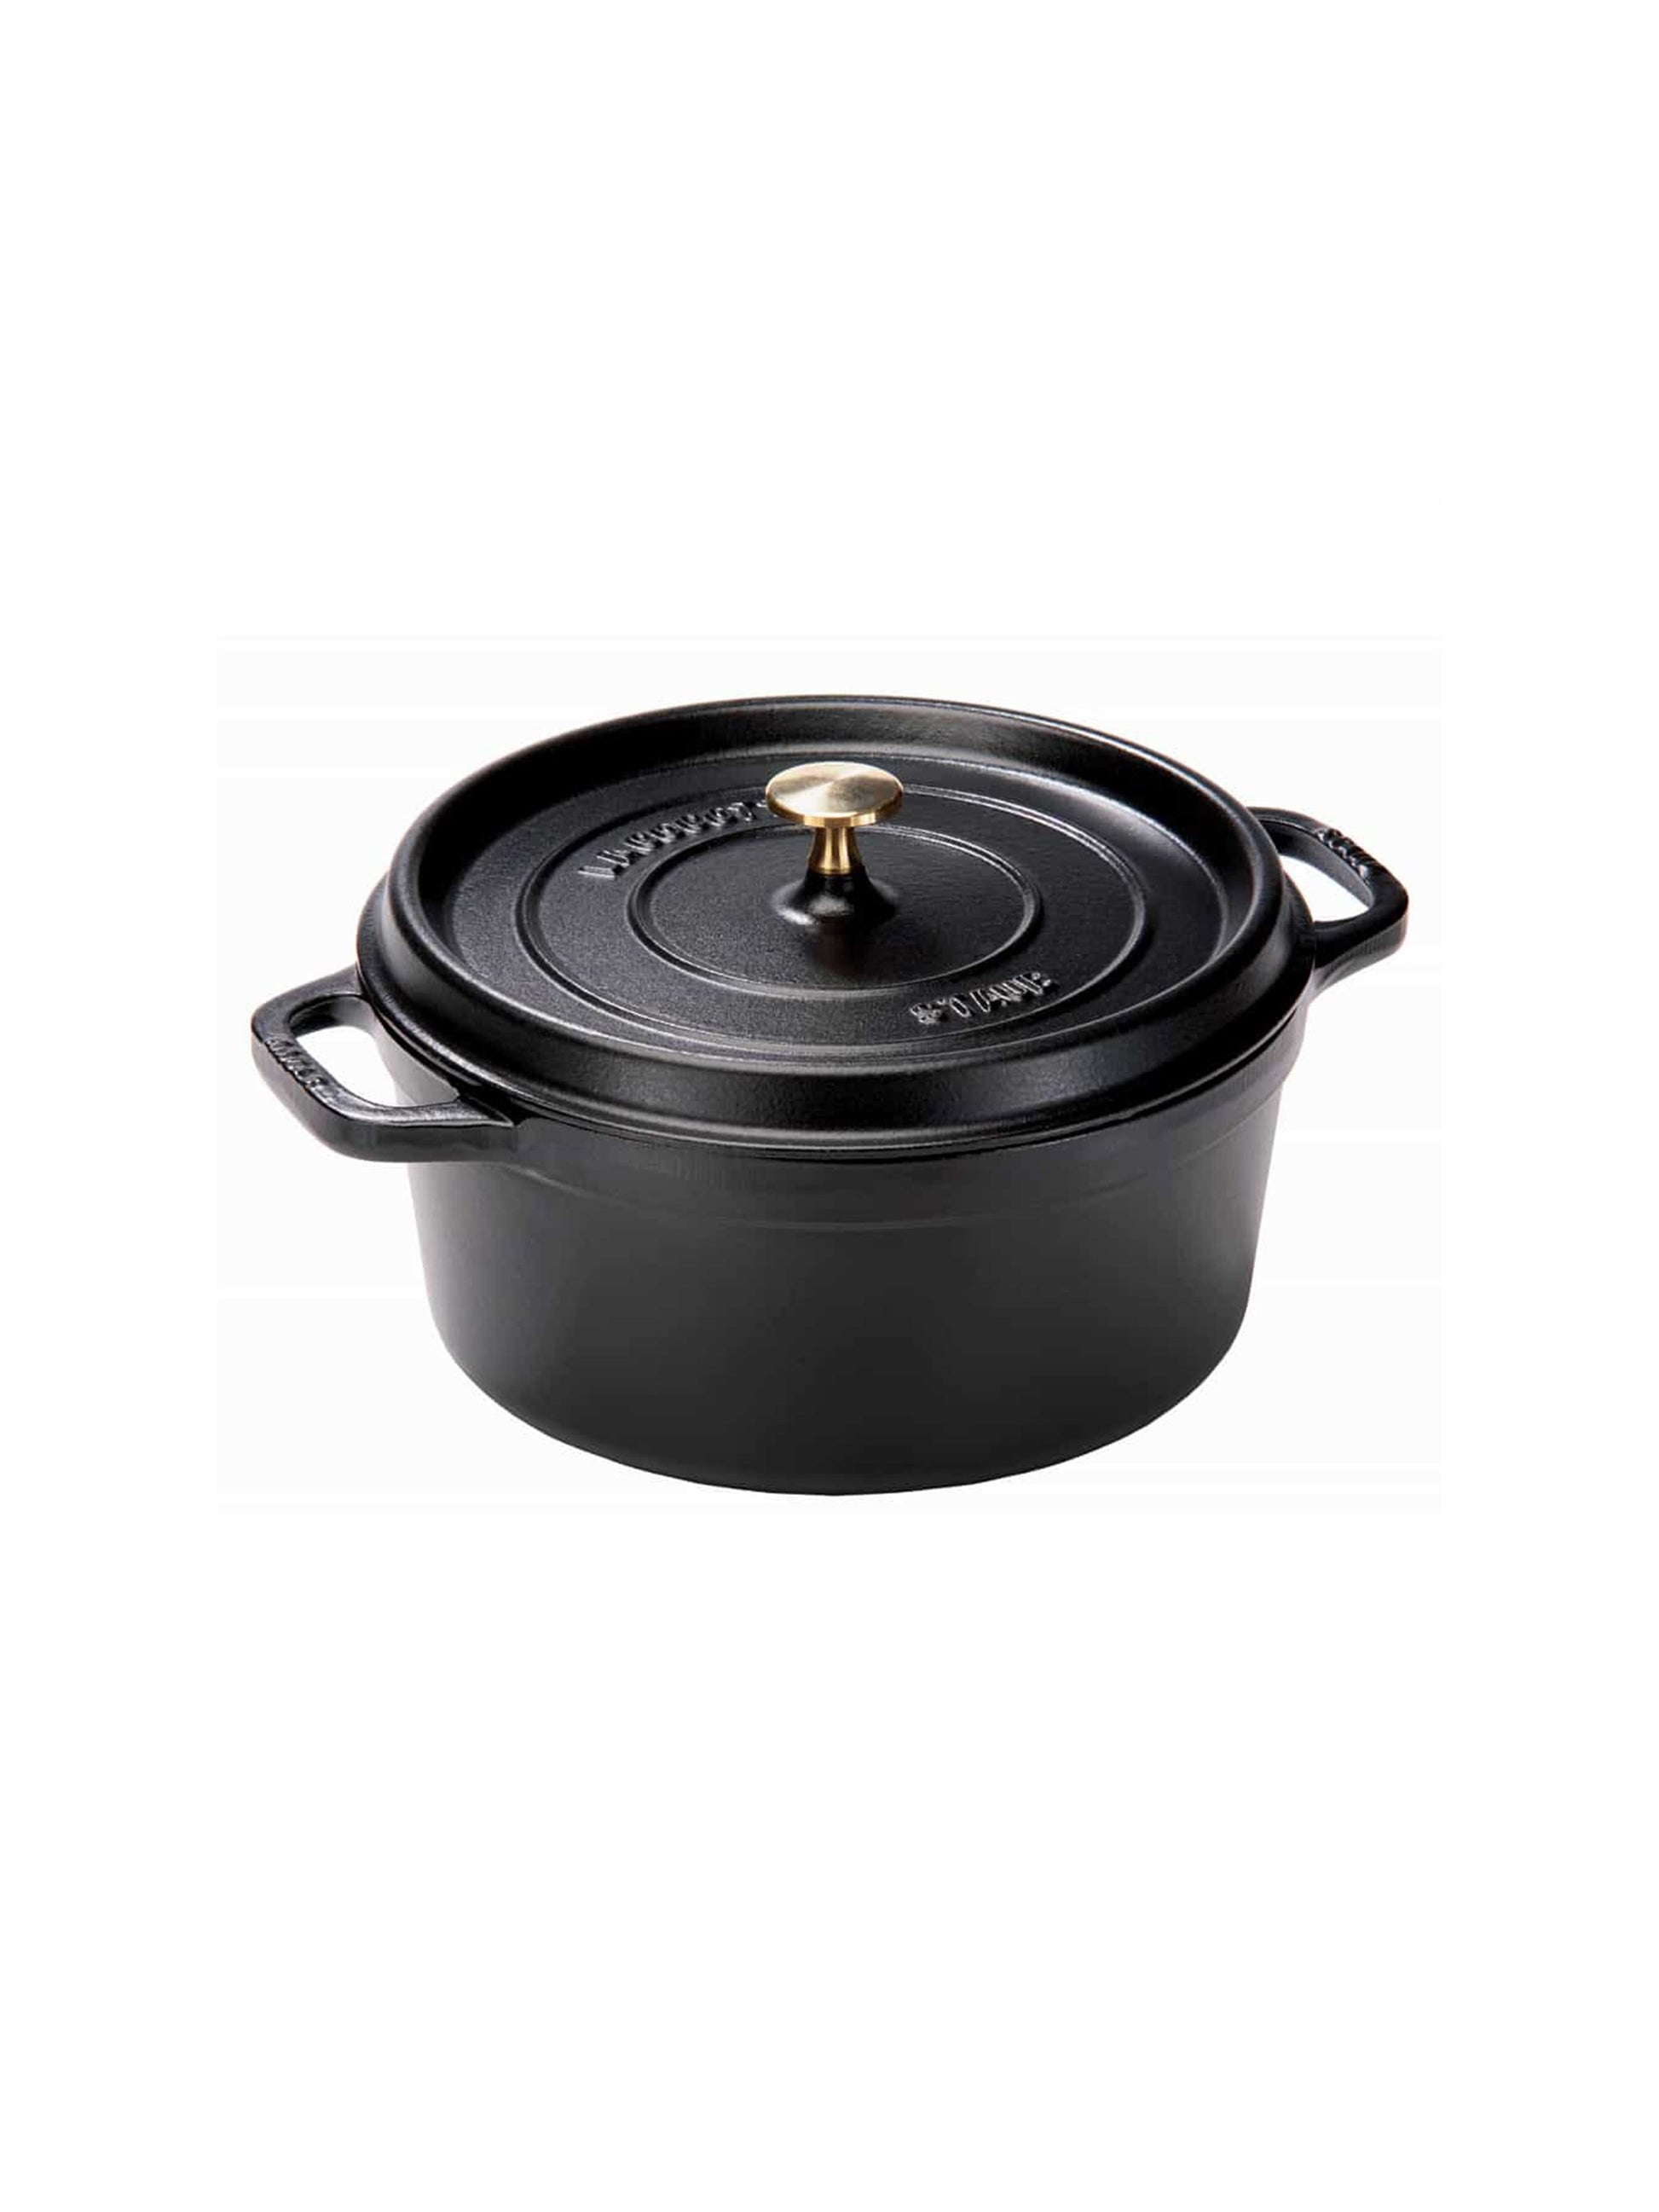 Staub Cast Iron 4-qt Round Cocotte with Glass Lid - White